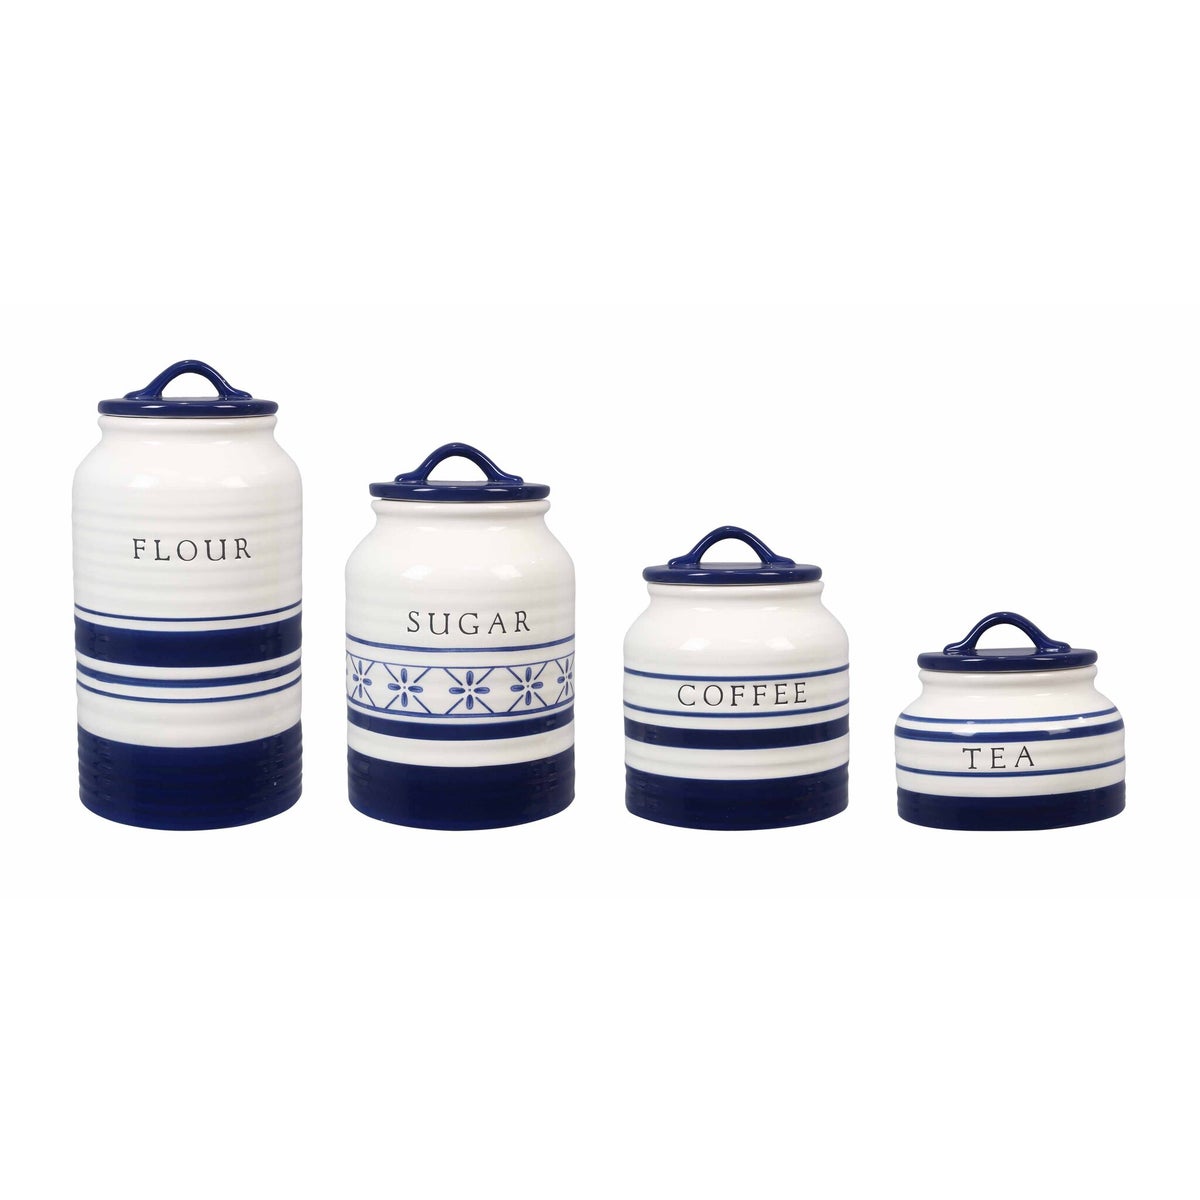 Ceramic Blue and White Canister Set of 4 with Stamped Lettering